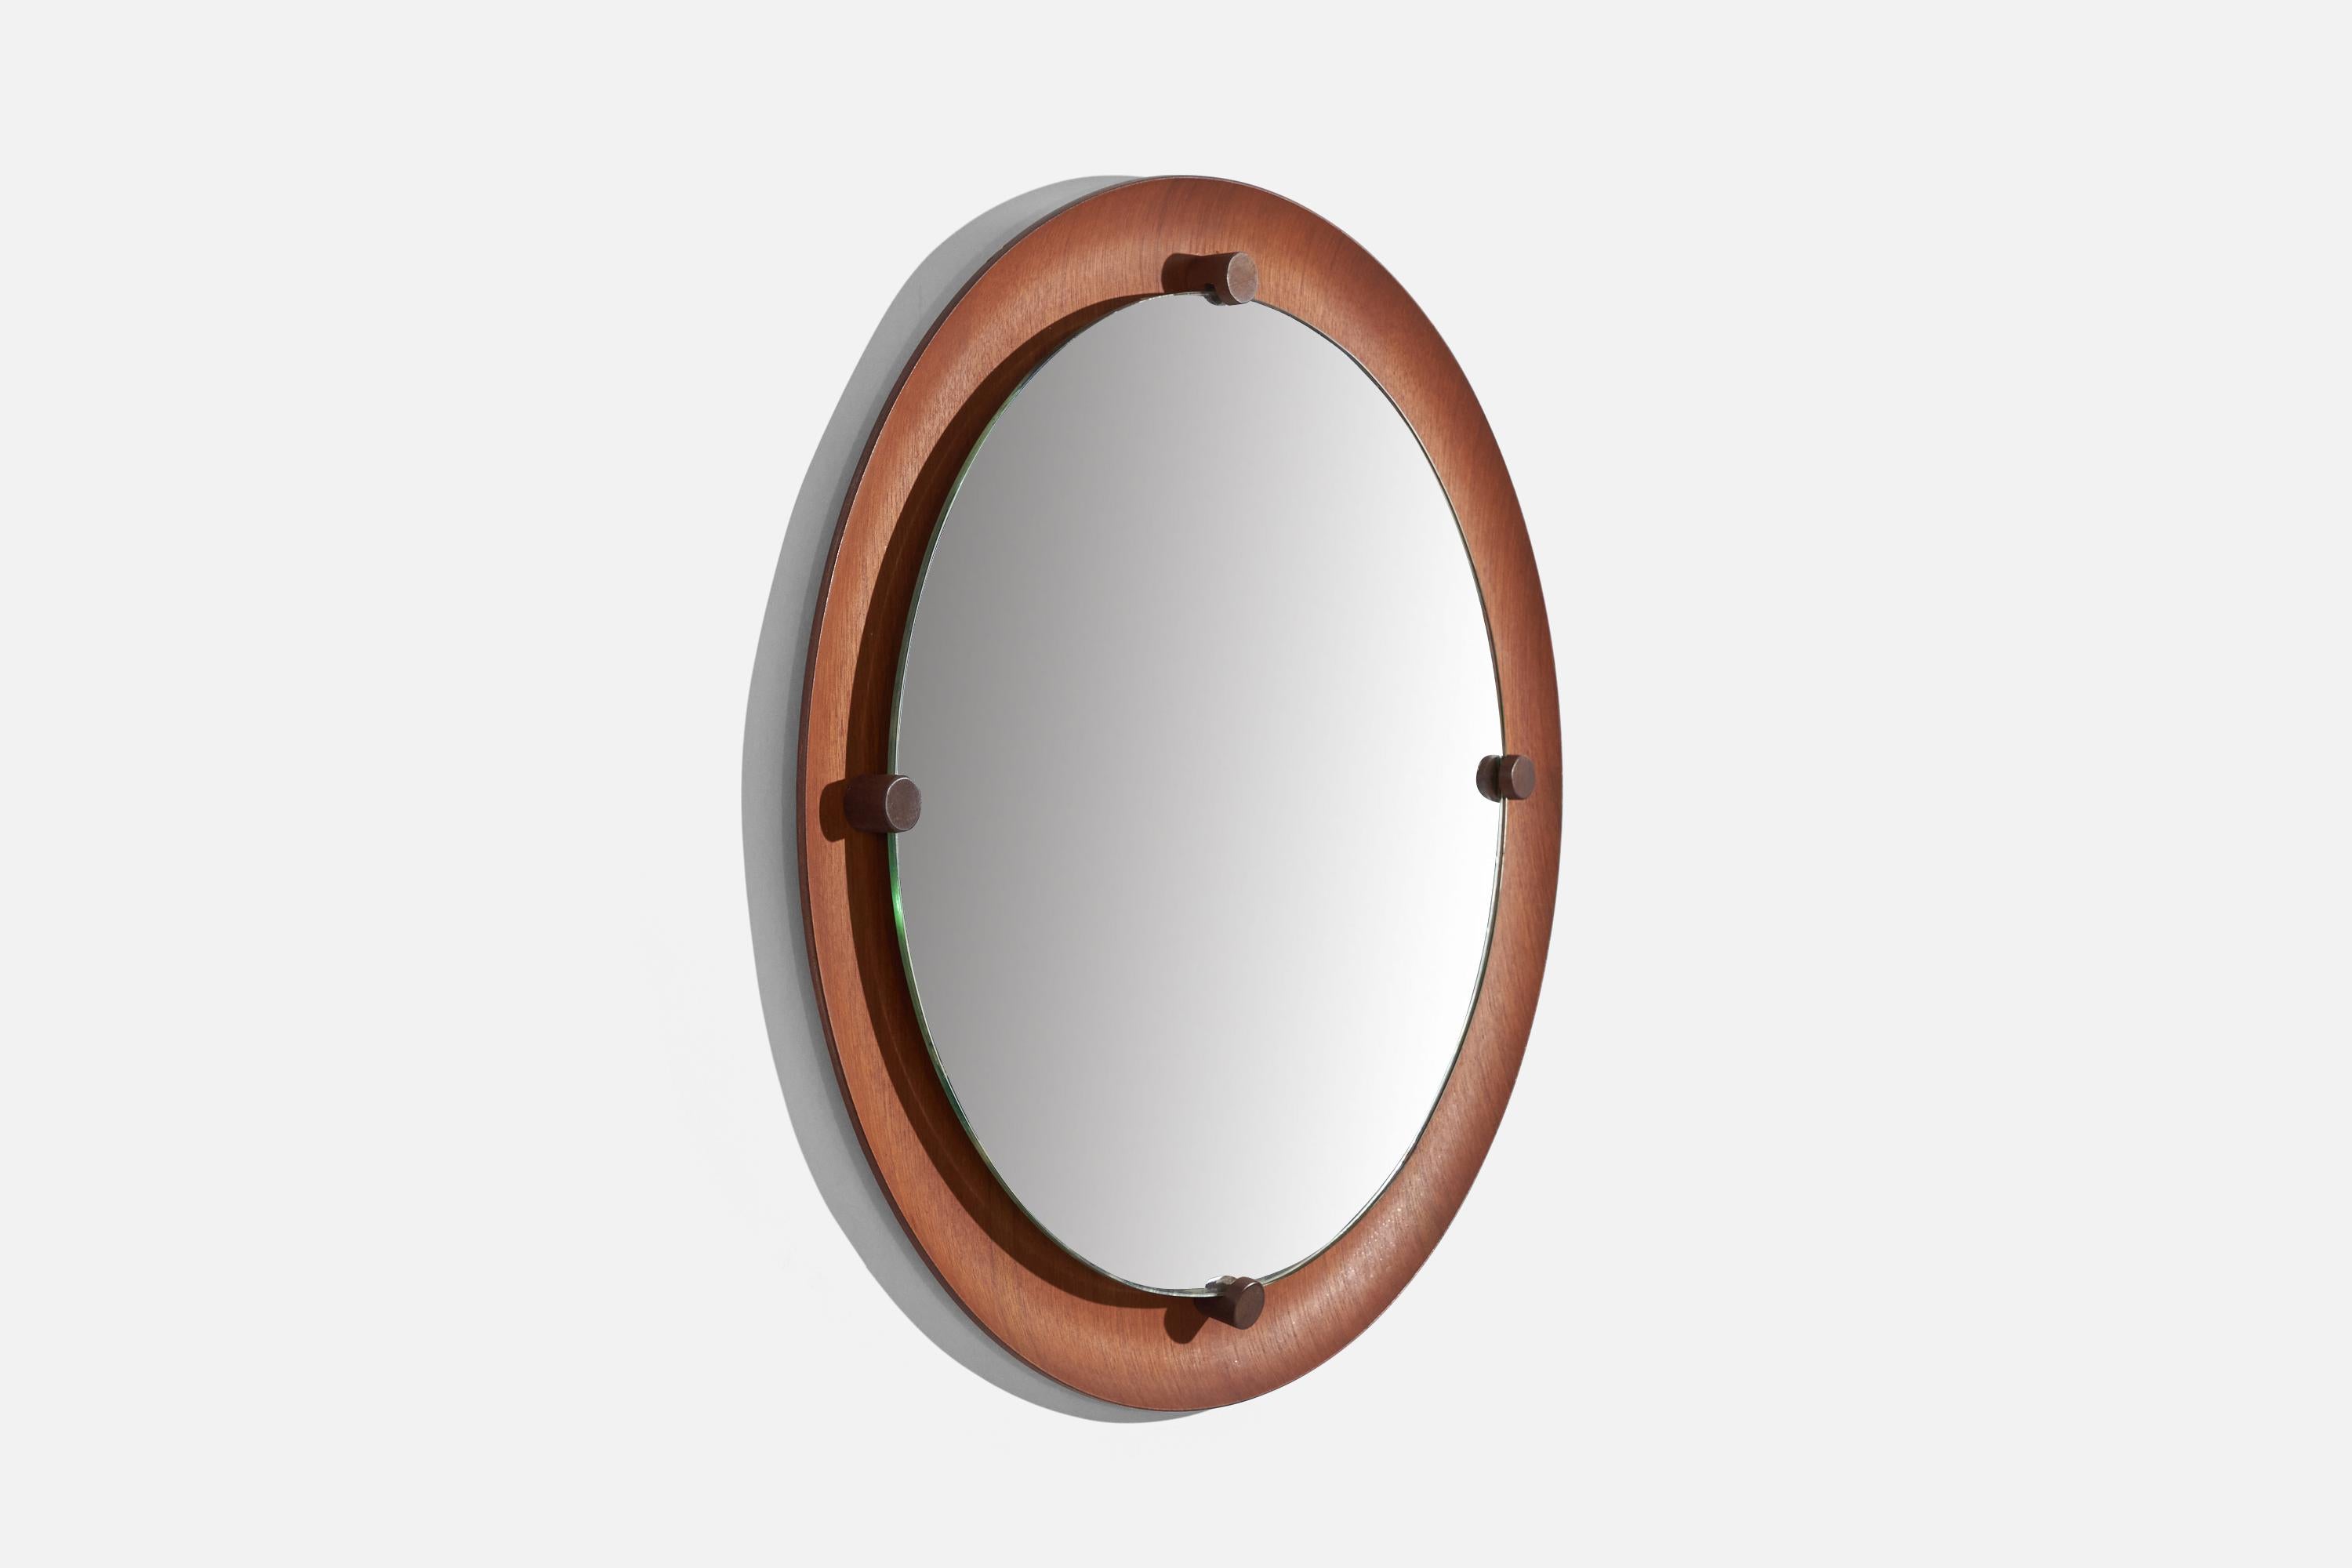 Mid-Century Modern Campo & Graffi 'Attributed', Wall Mirror, Teak, Brass, Mirror, Italy, 1950s For Sale